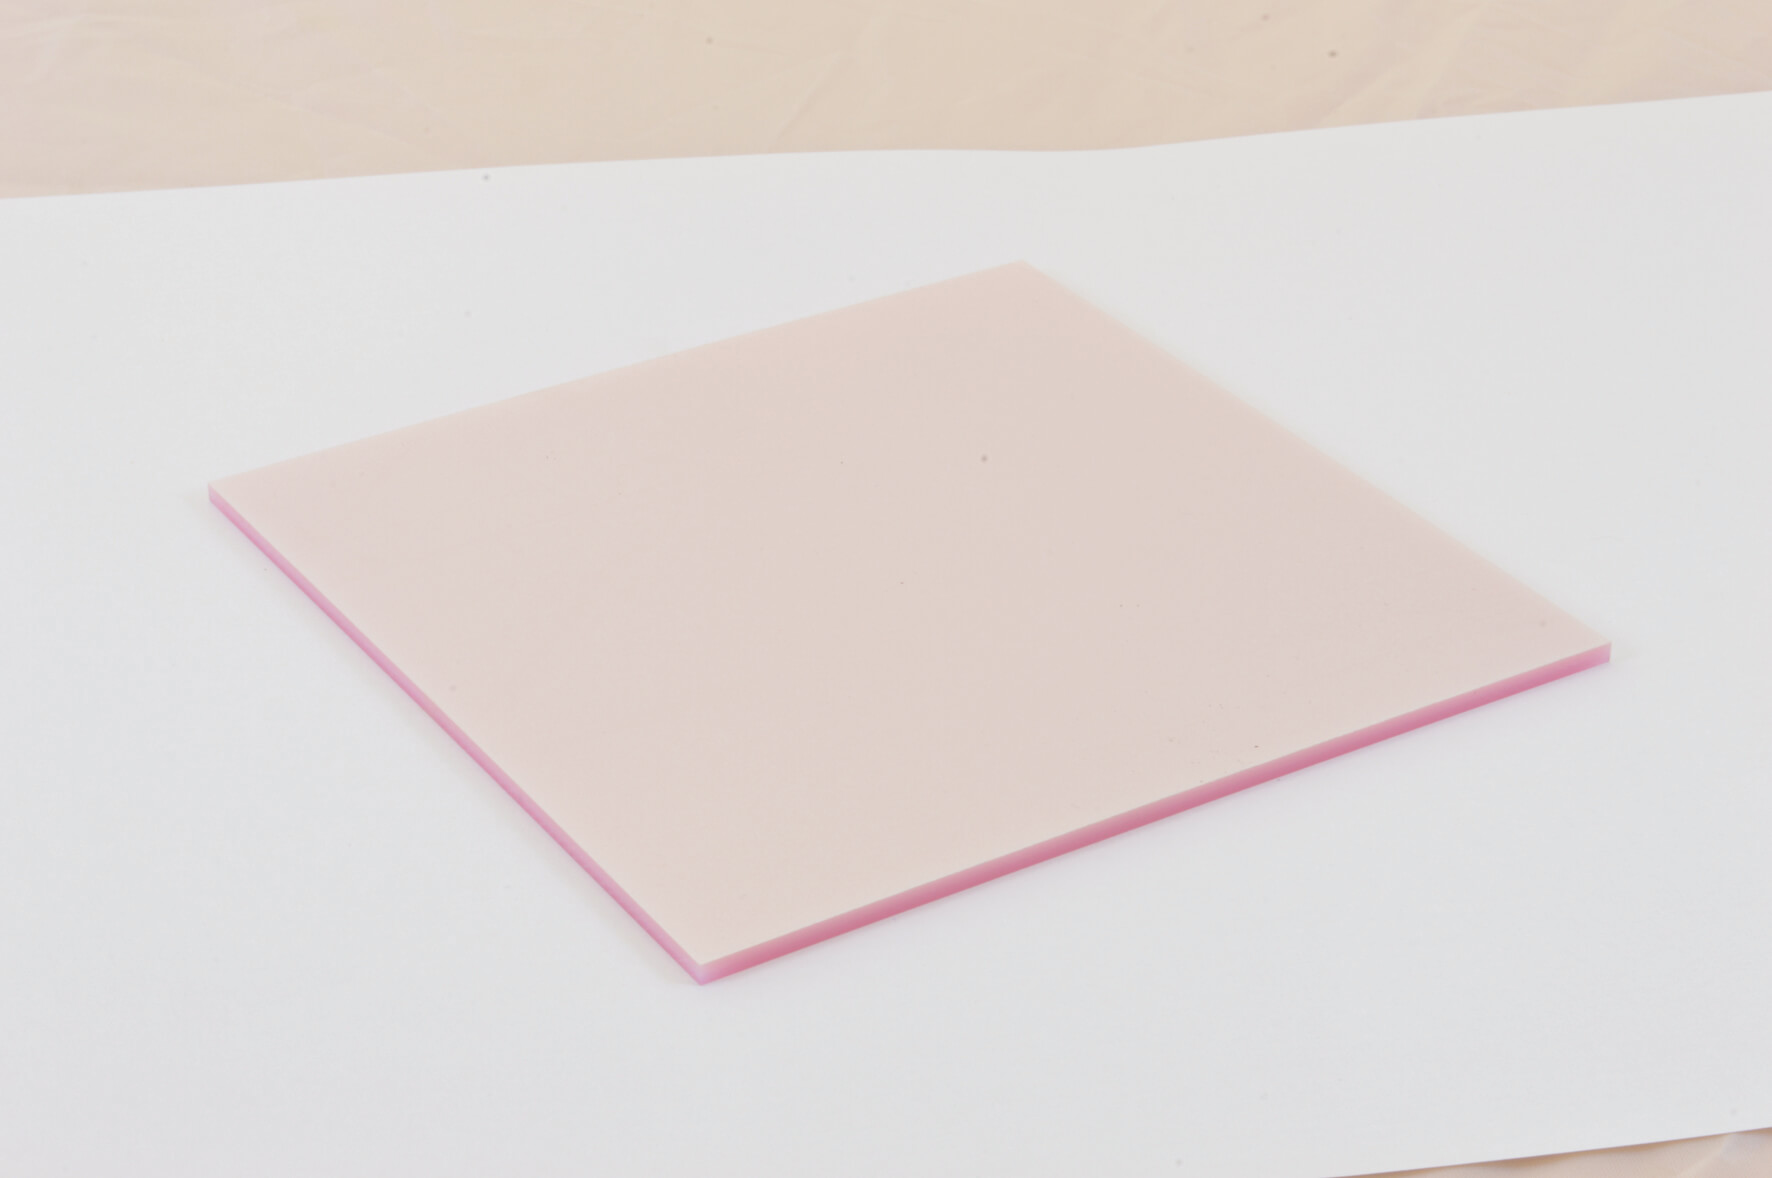 Pearlescent Cast Acrylic 3mm Sheet - Candy 600 x 400mm